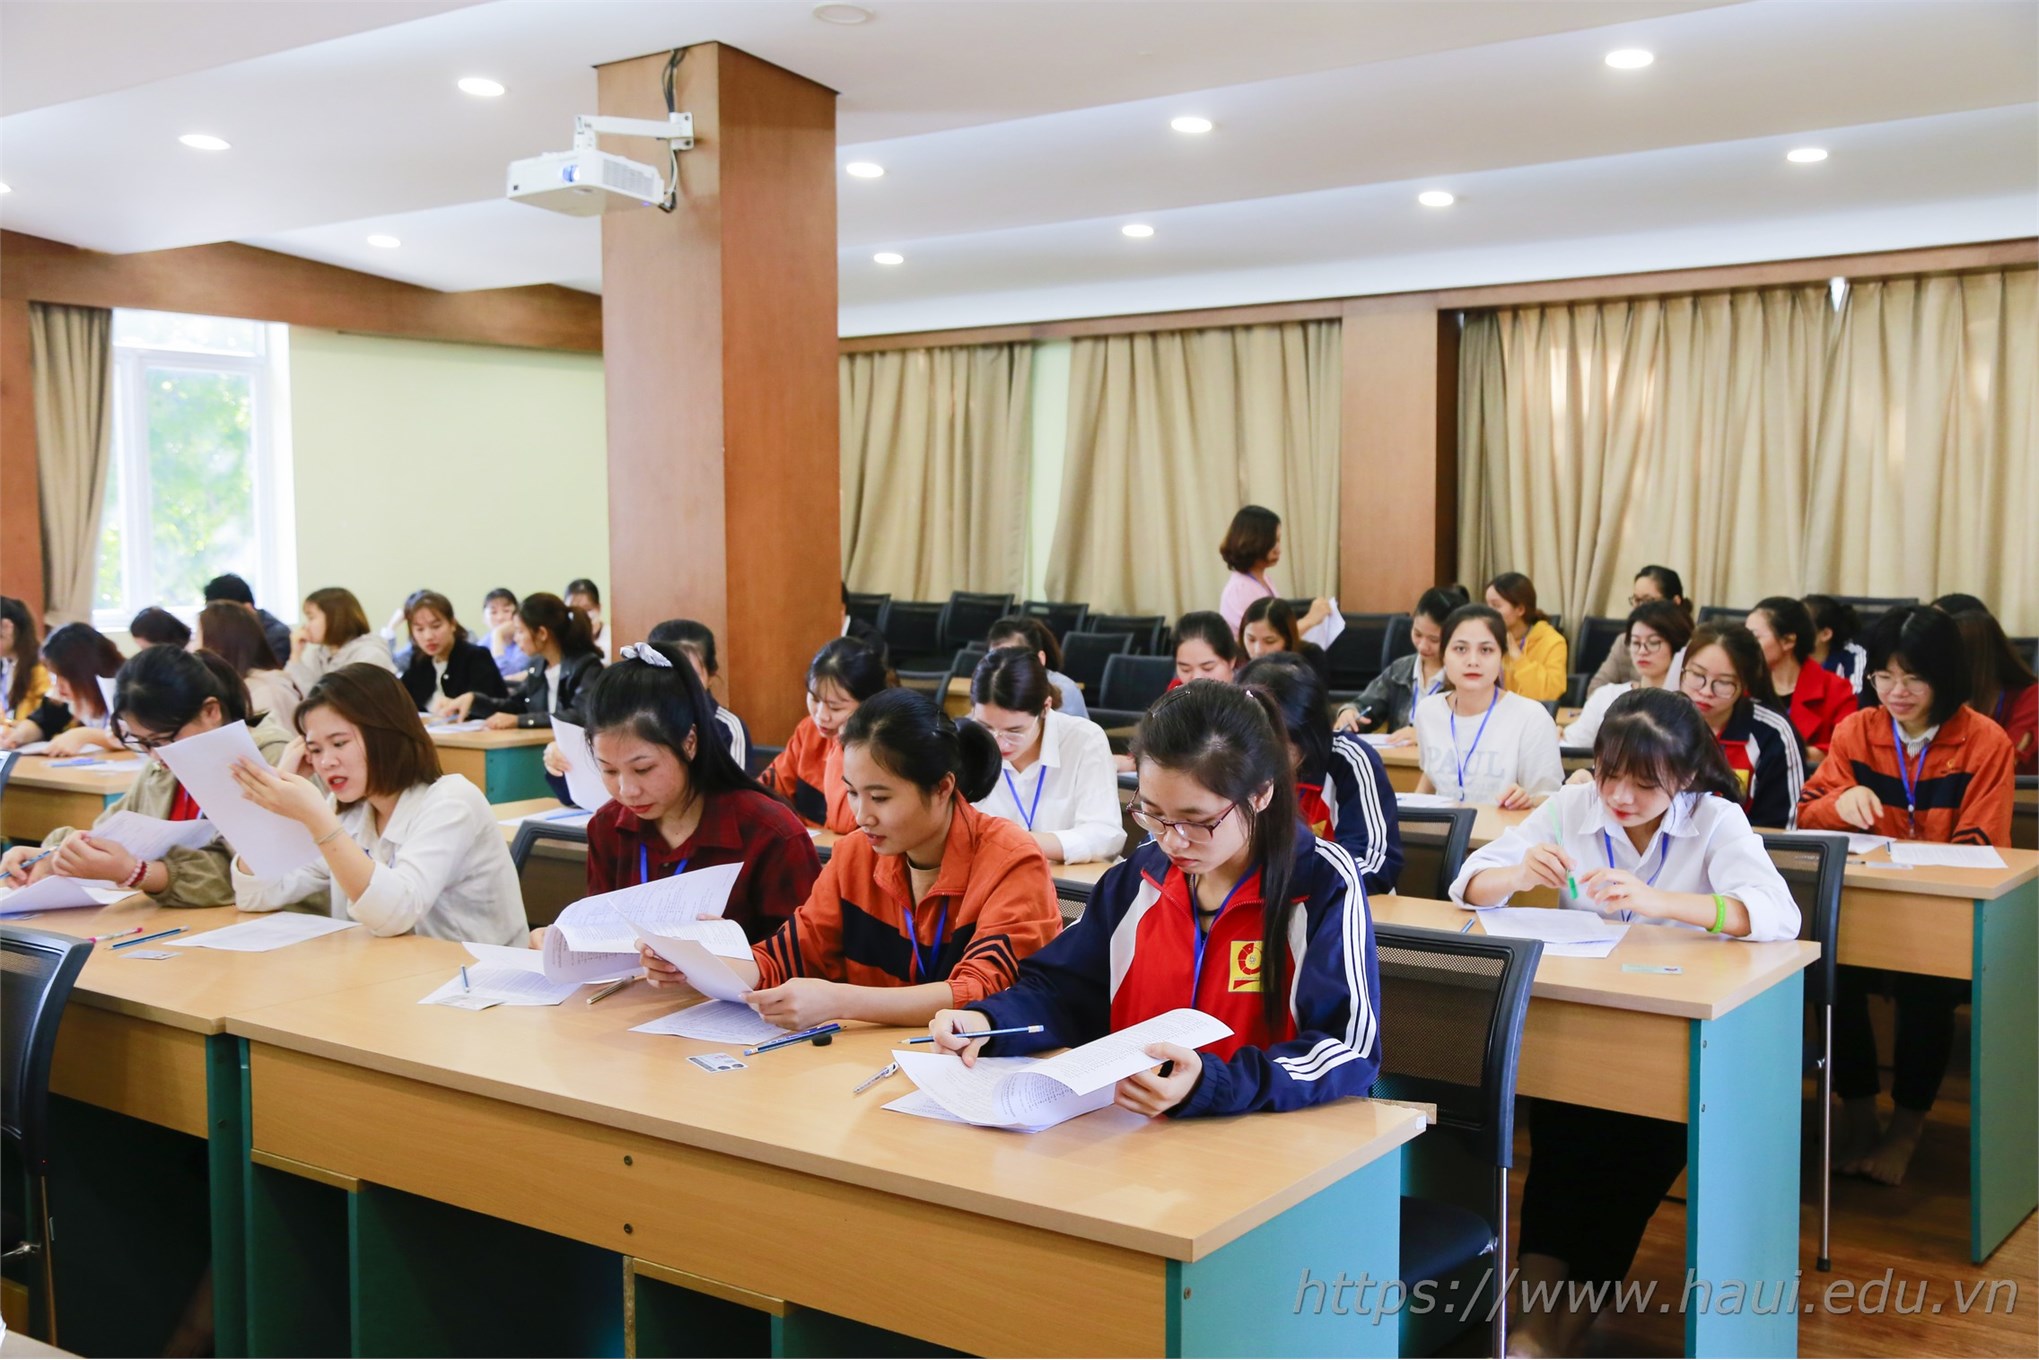 50 participants take place in the National Vocational Skills Assessment 2020